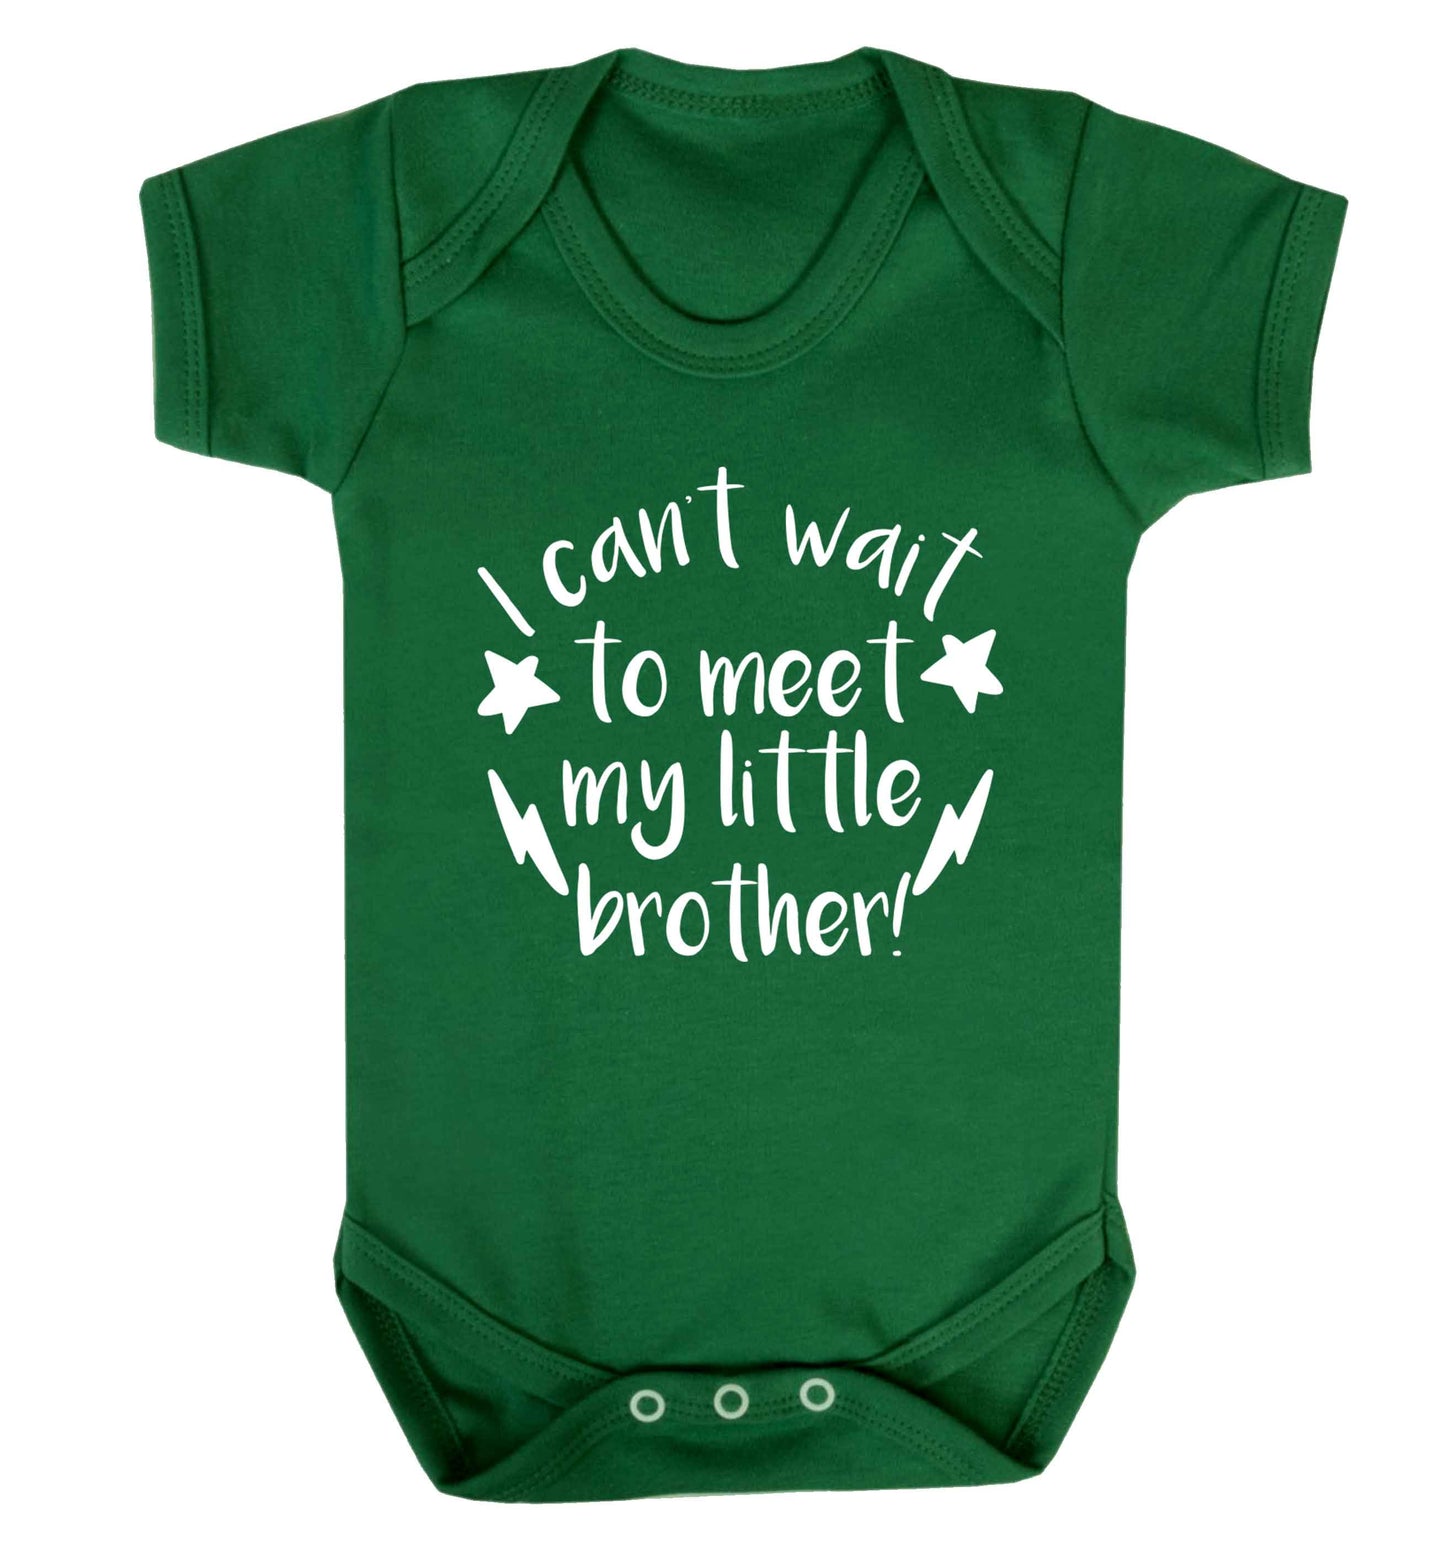 I can't wait to meet my sister! Baby Vest green 18-24 months